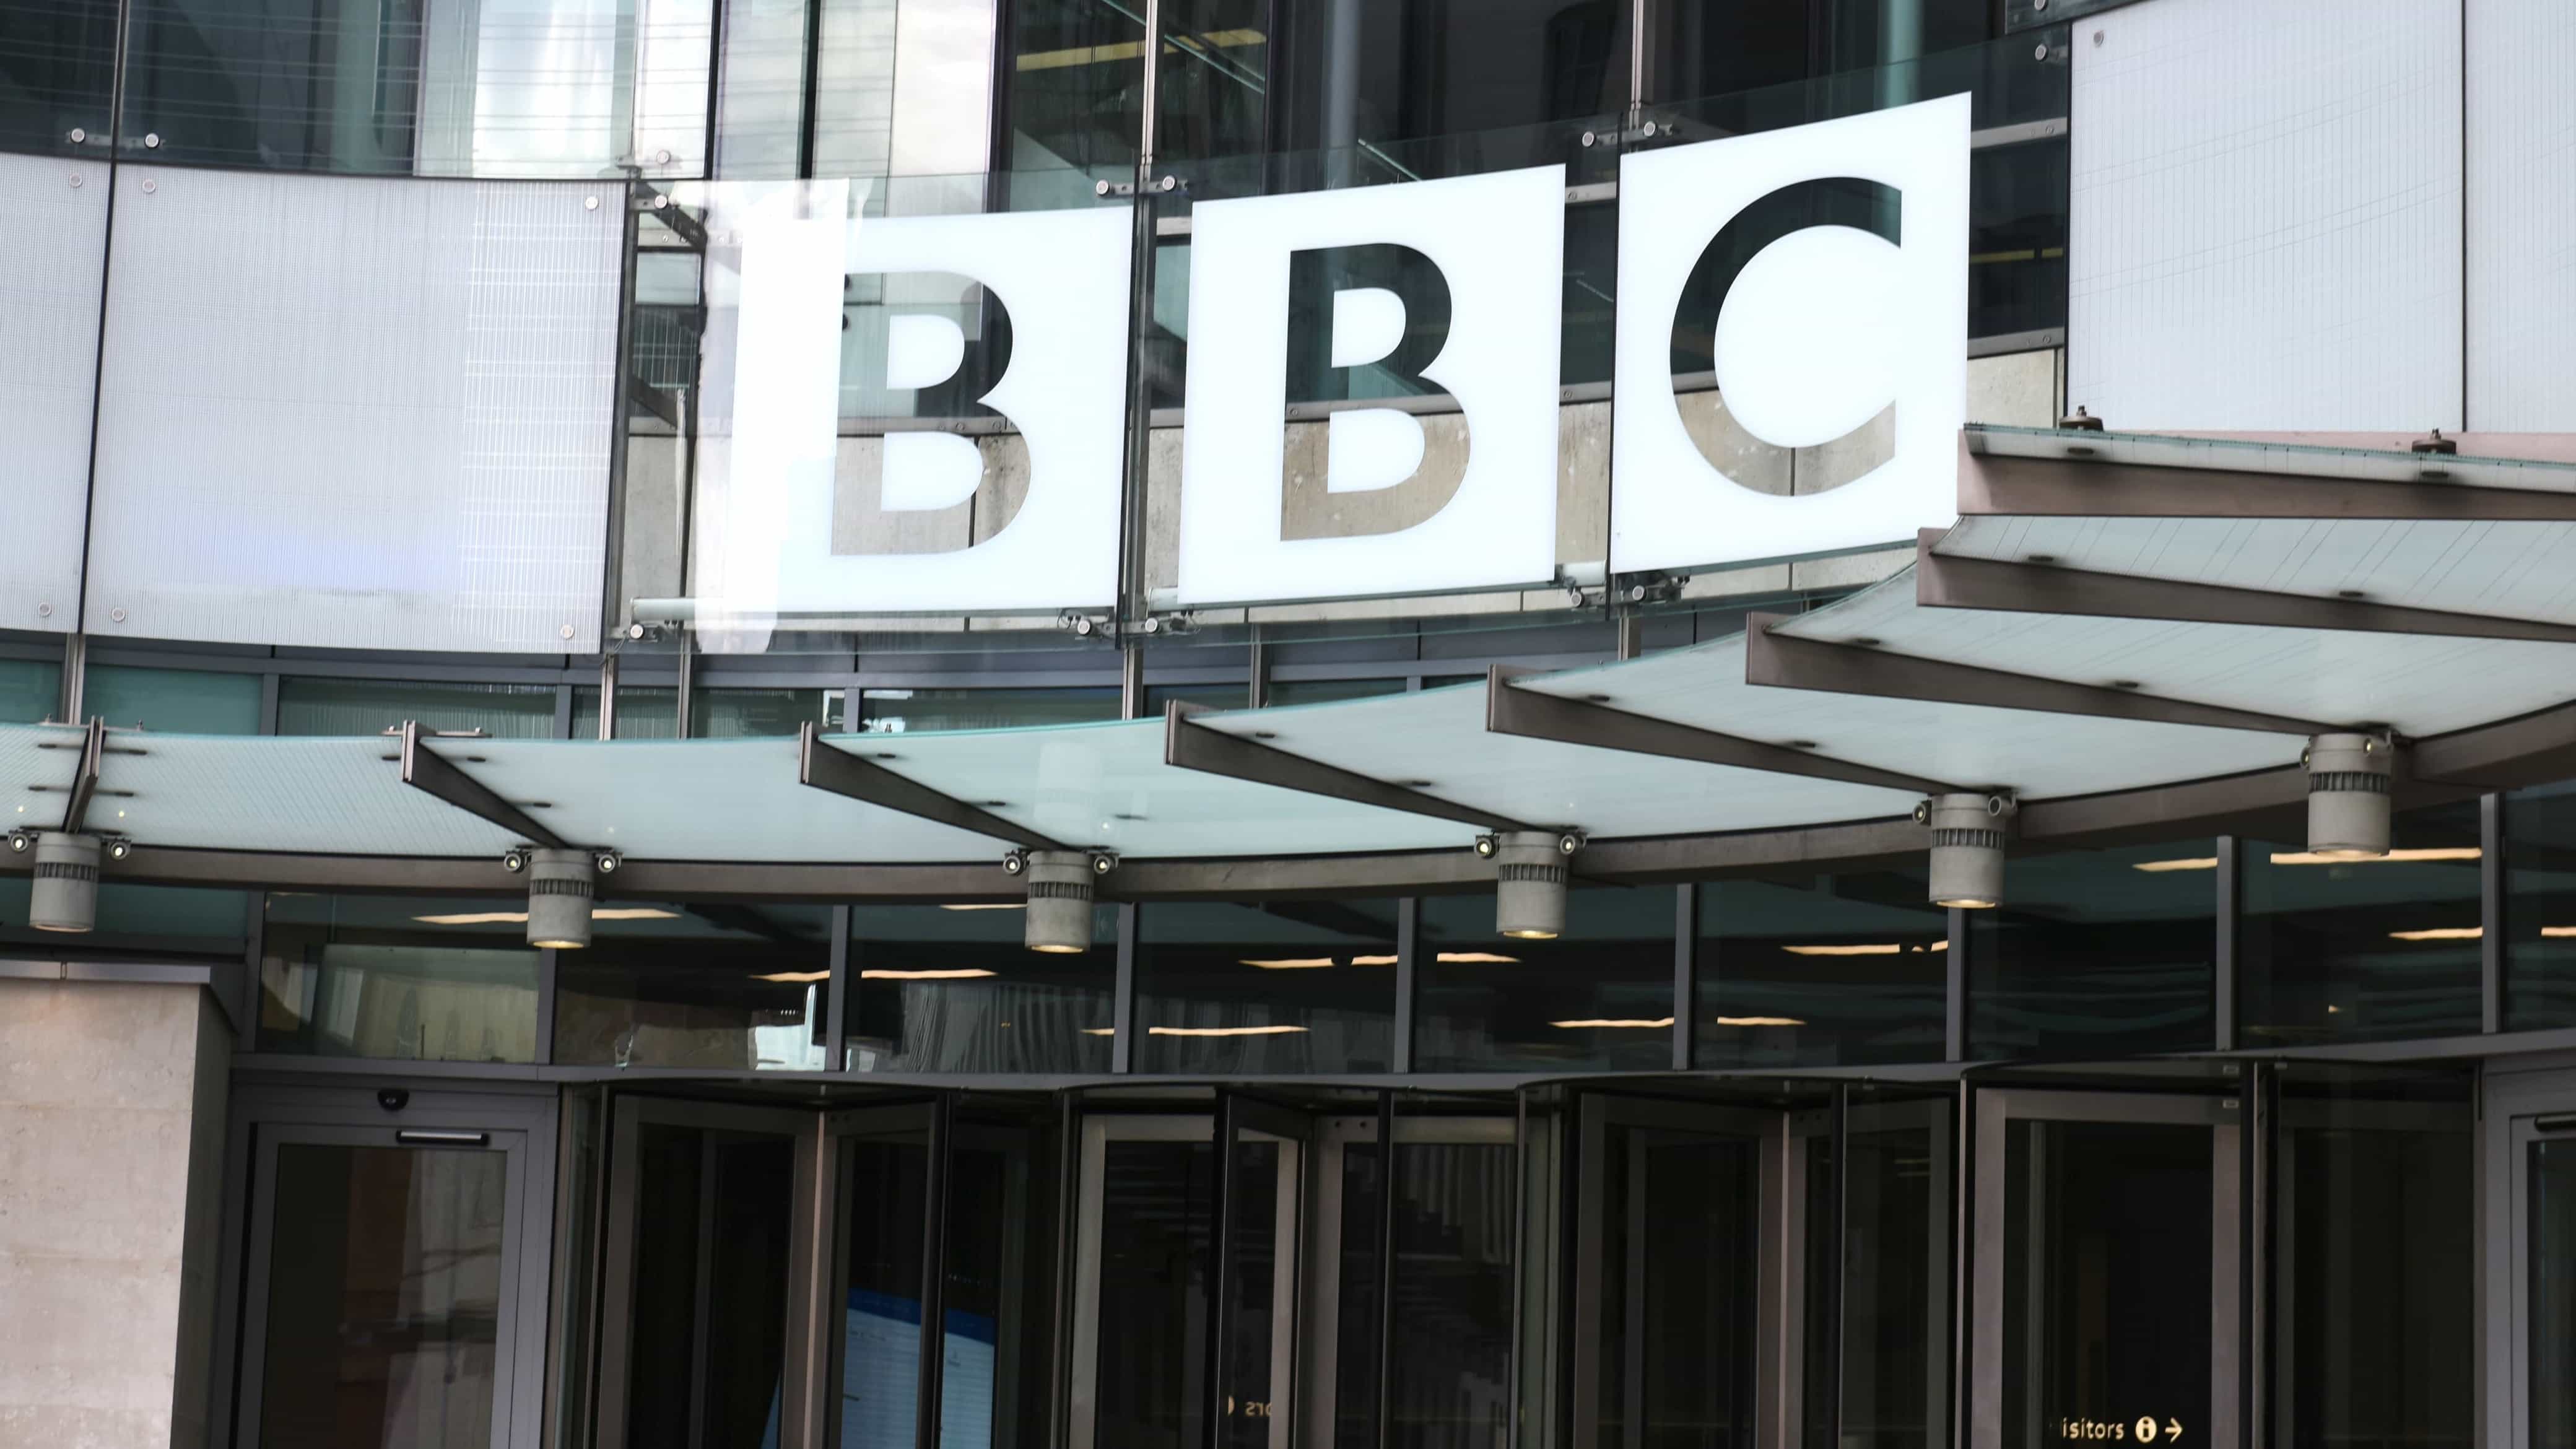 UK Department Recommends BBC Reforms Over Alleged Bias